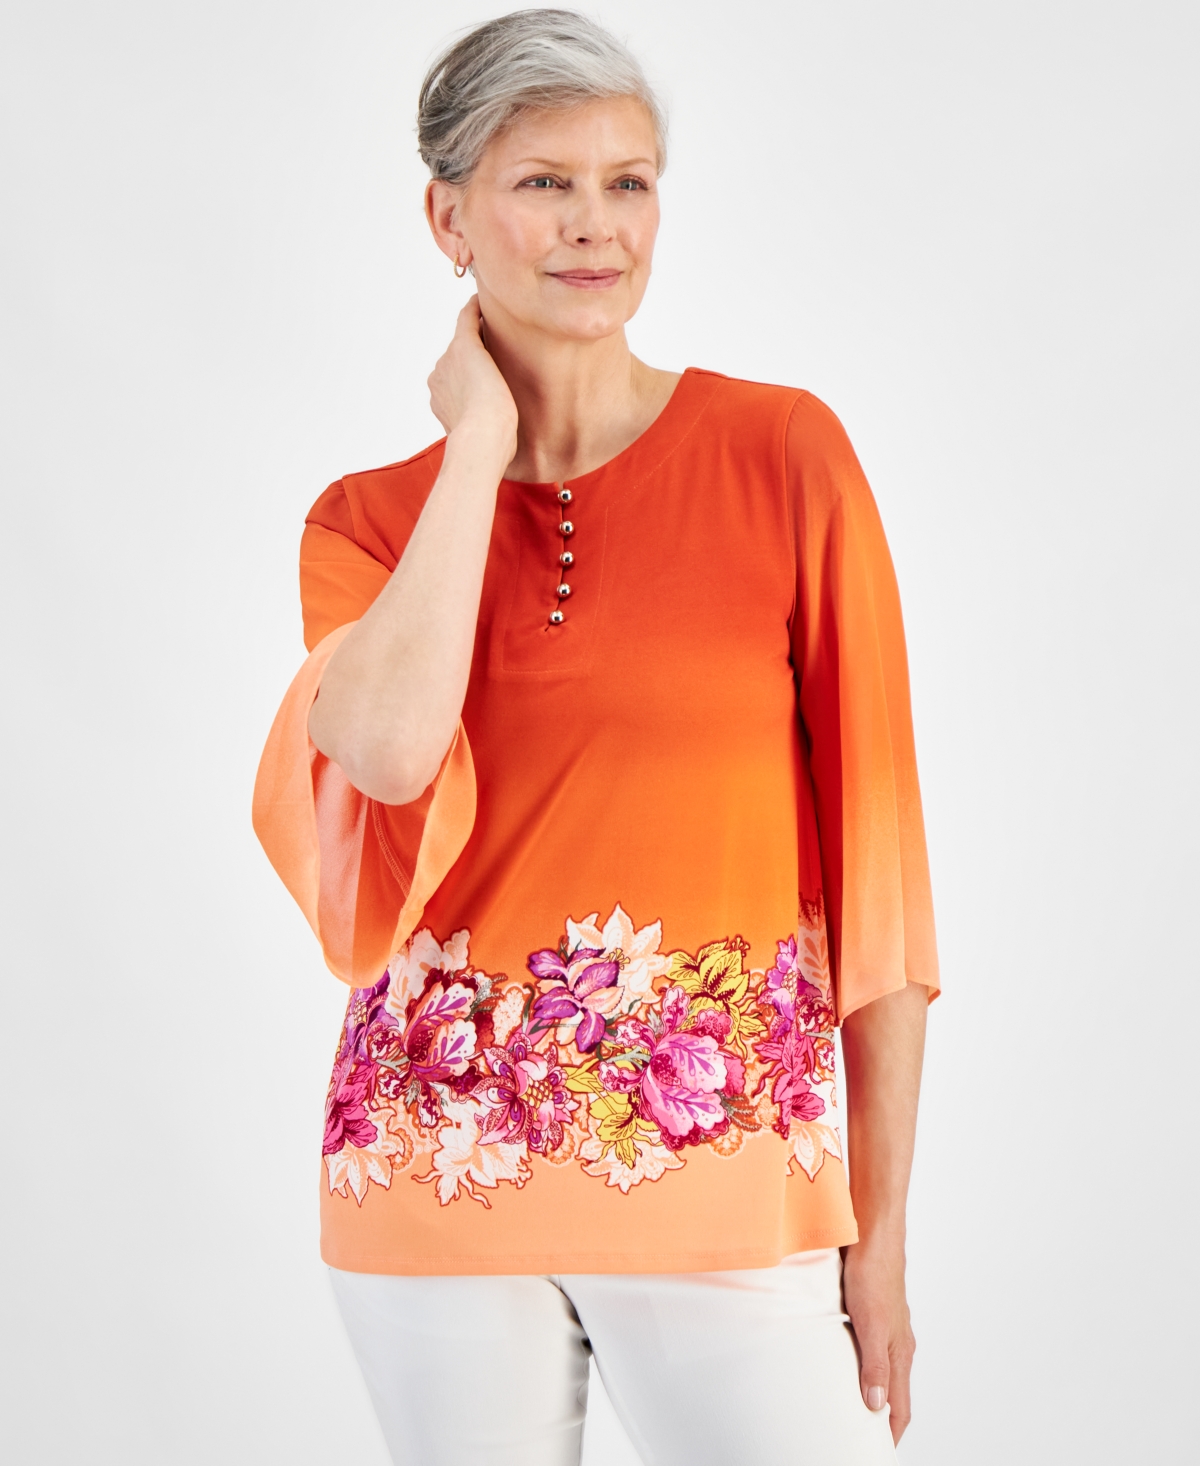 Women's 3/4 Sleeve Ombre Chiffon Top, Created for Macy's - Pumpkin Seed Combo